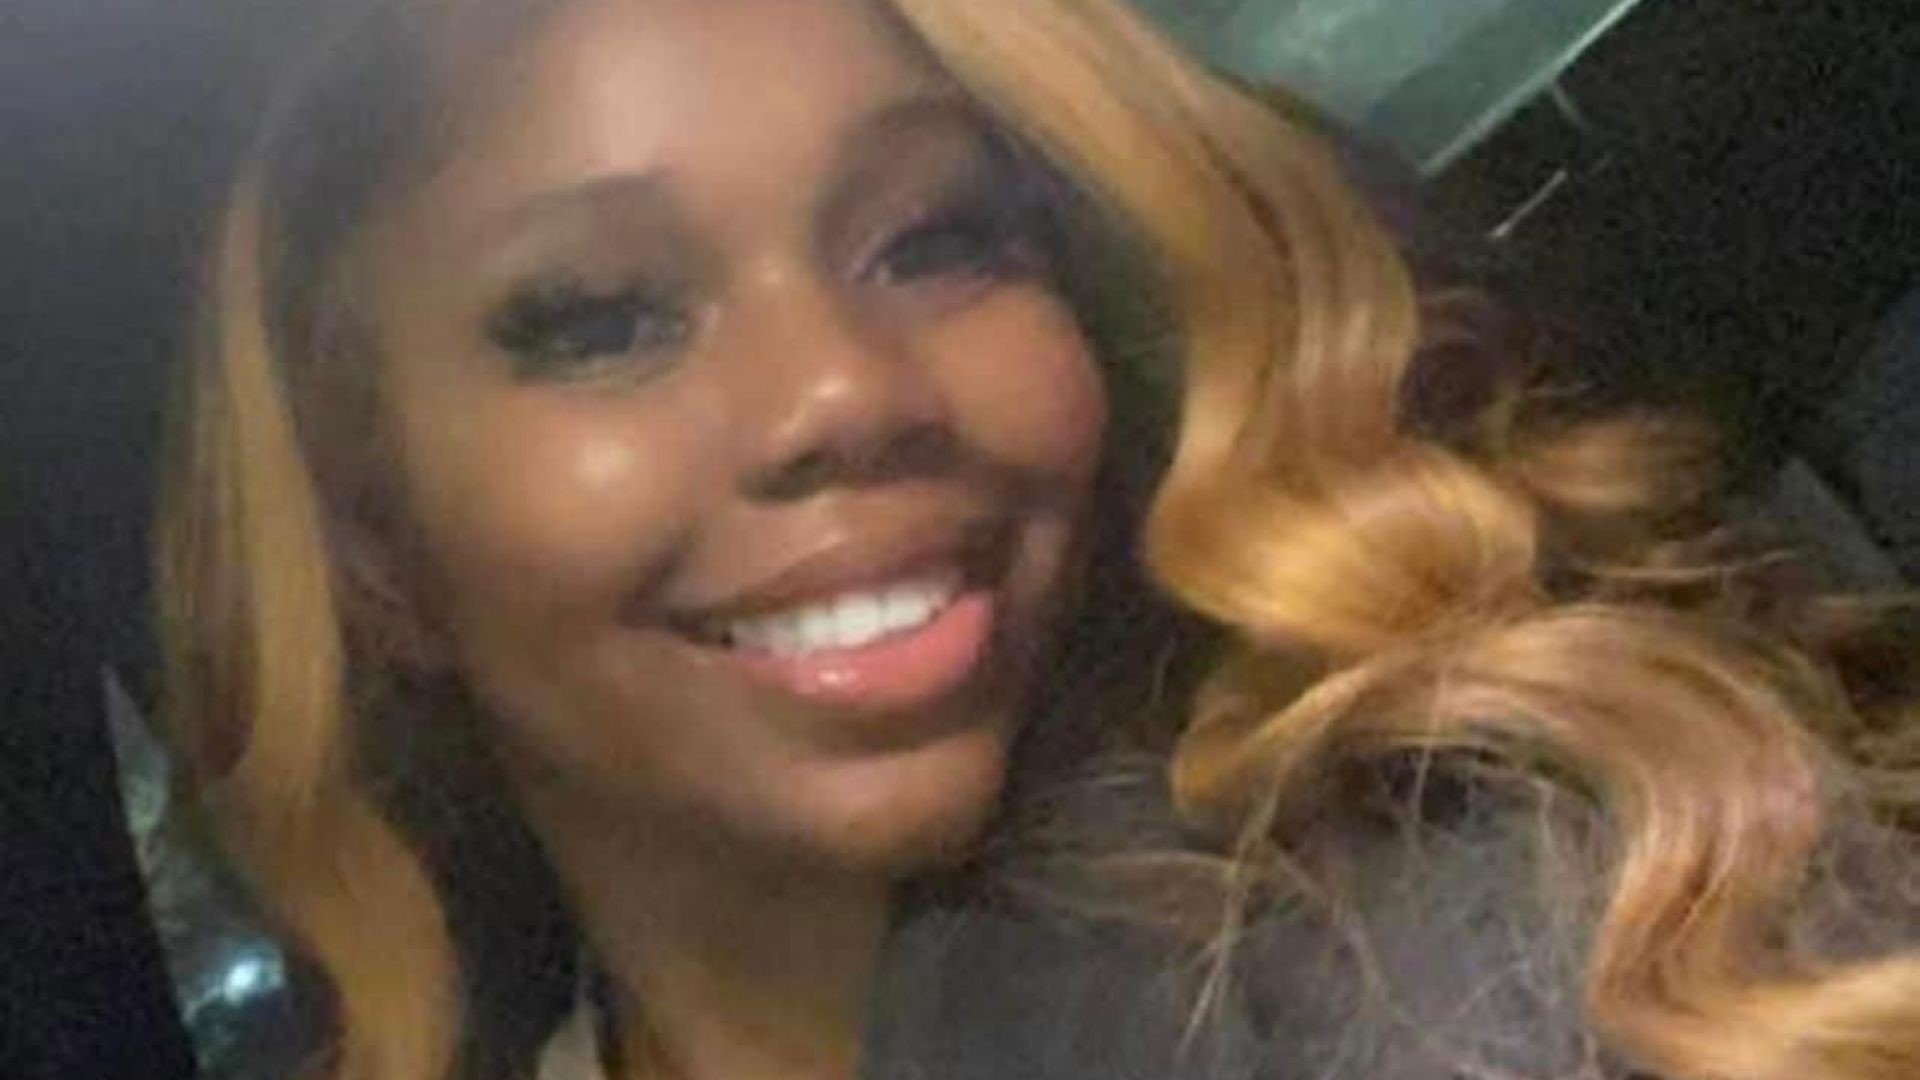 Authorities in Alabama are offering an update on the investigation of a woman who went missing after reporting a toddler walking down the interstate.